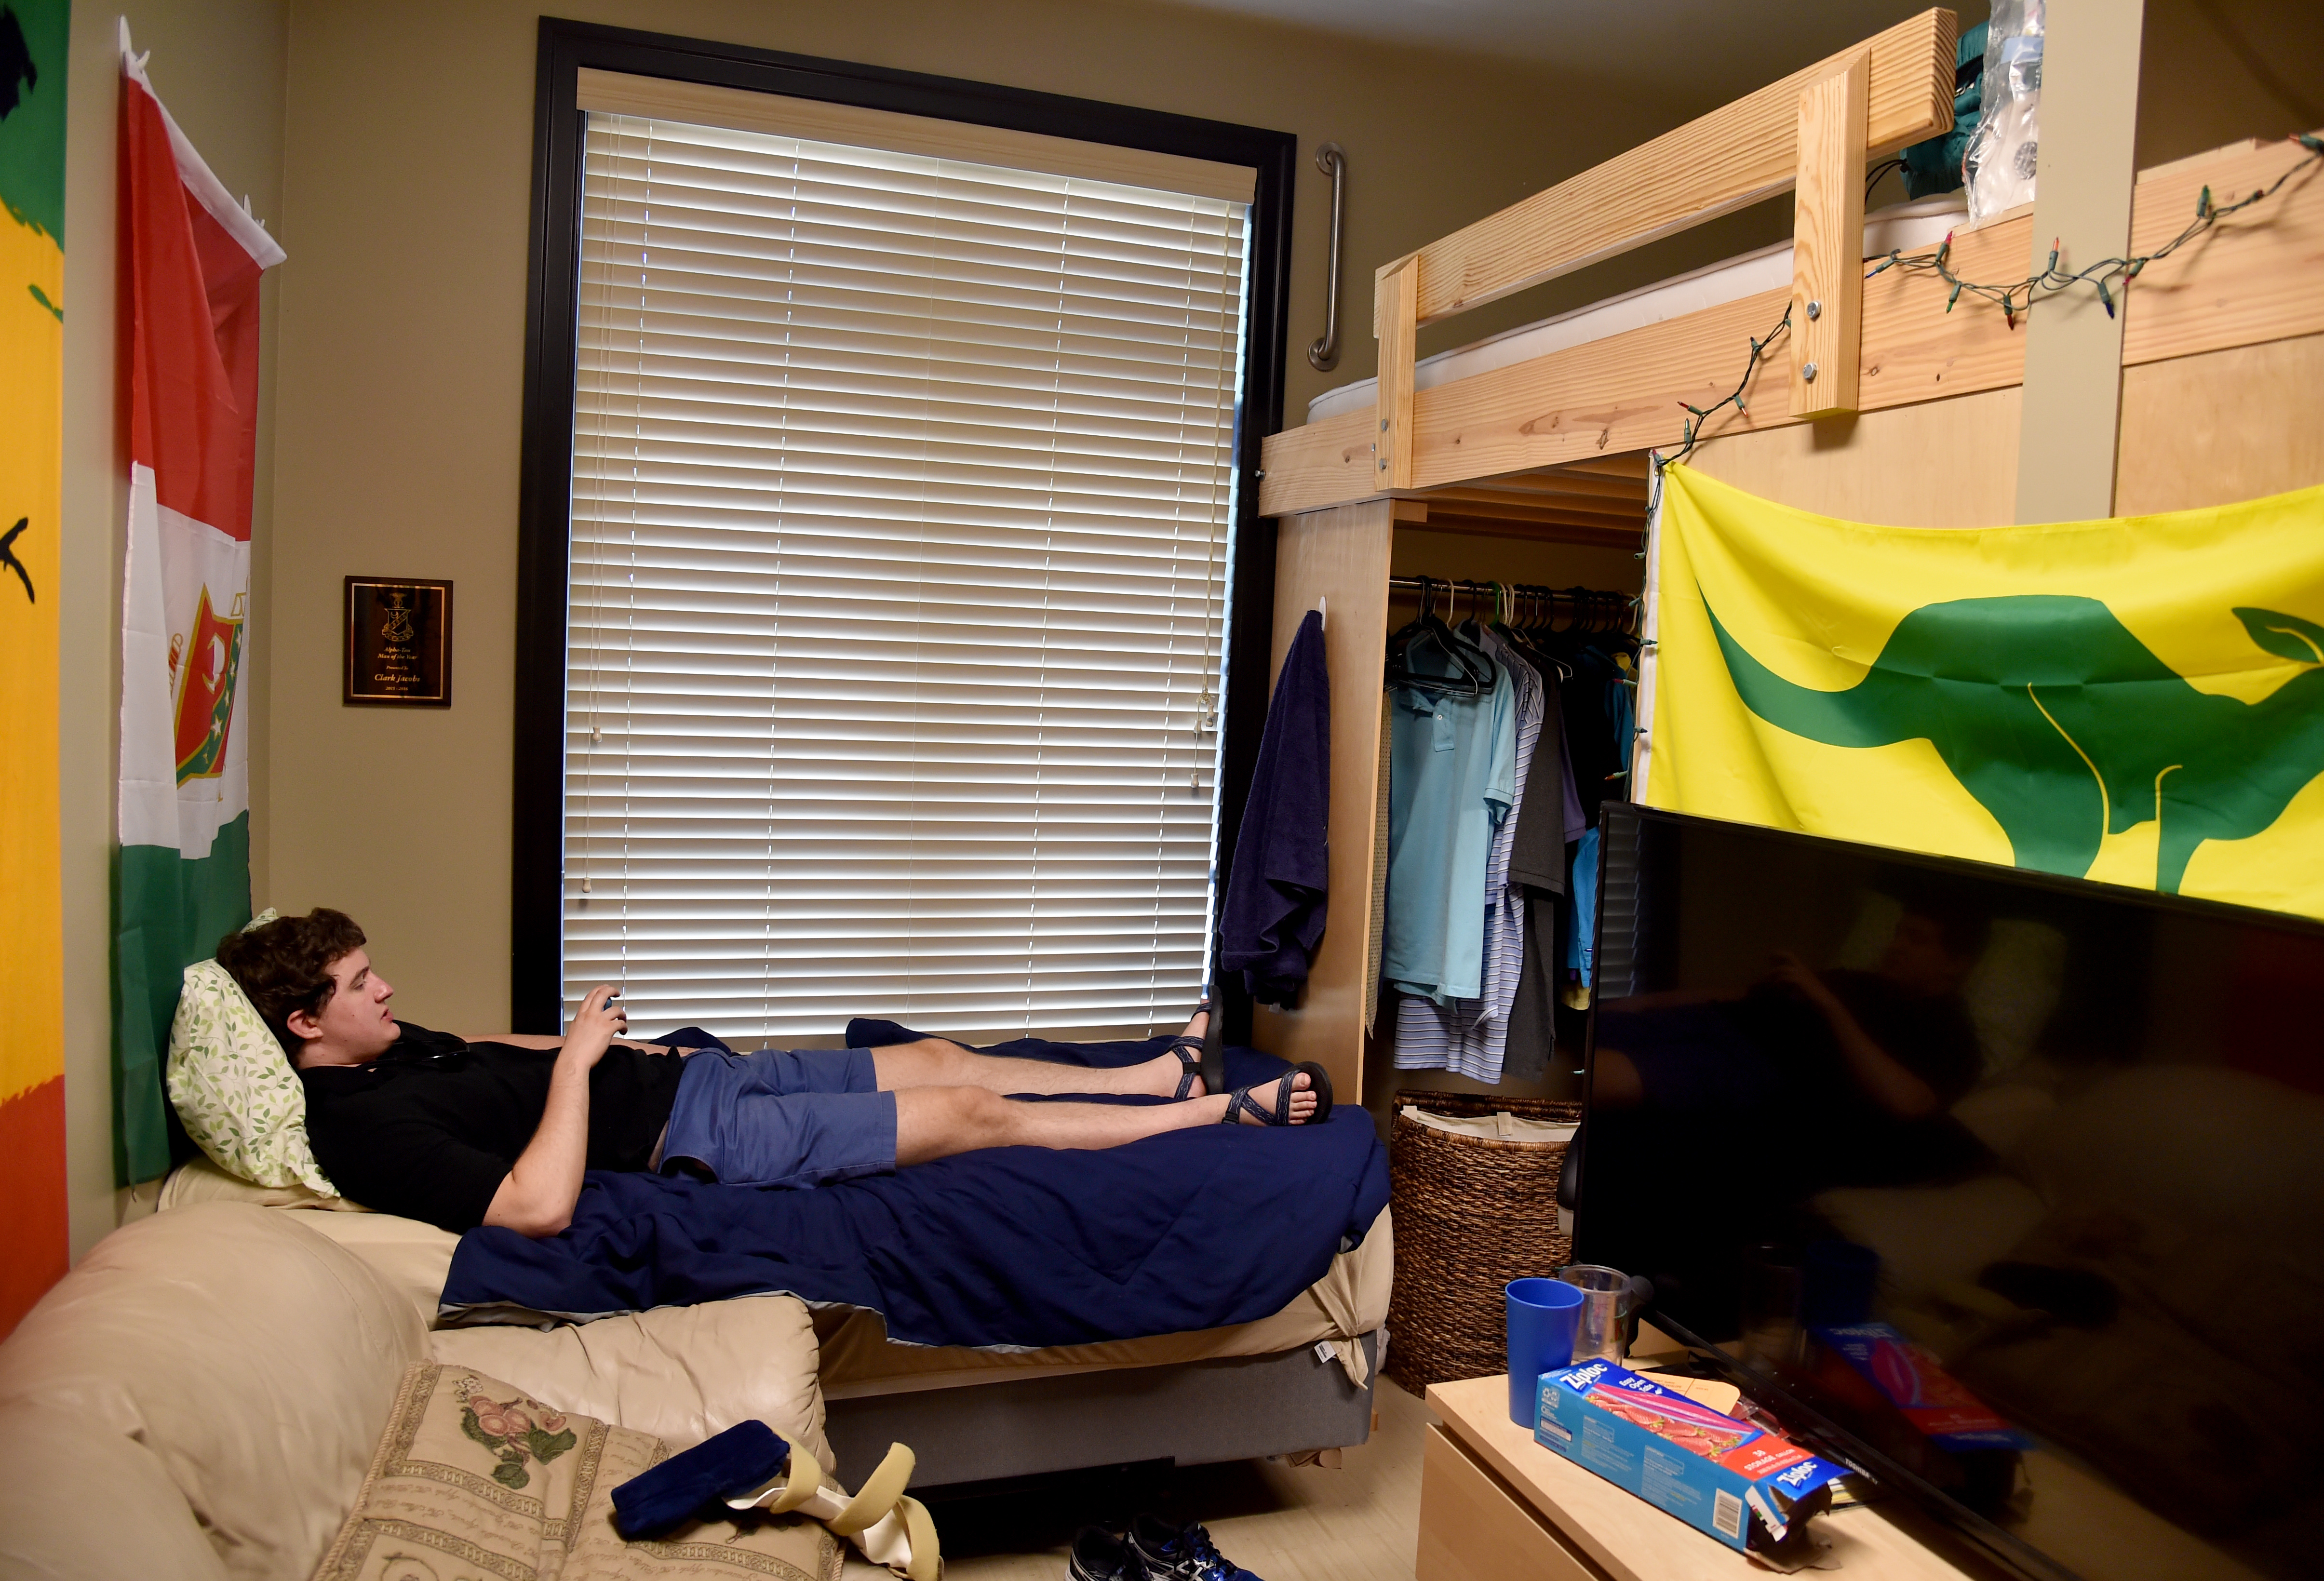 EXCLUSIVE Moms lobbying leads to new safety feature in public dorm rooms